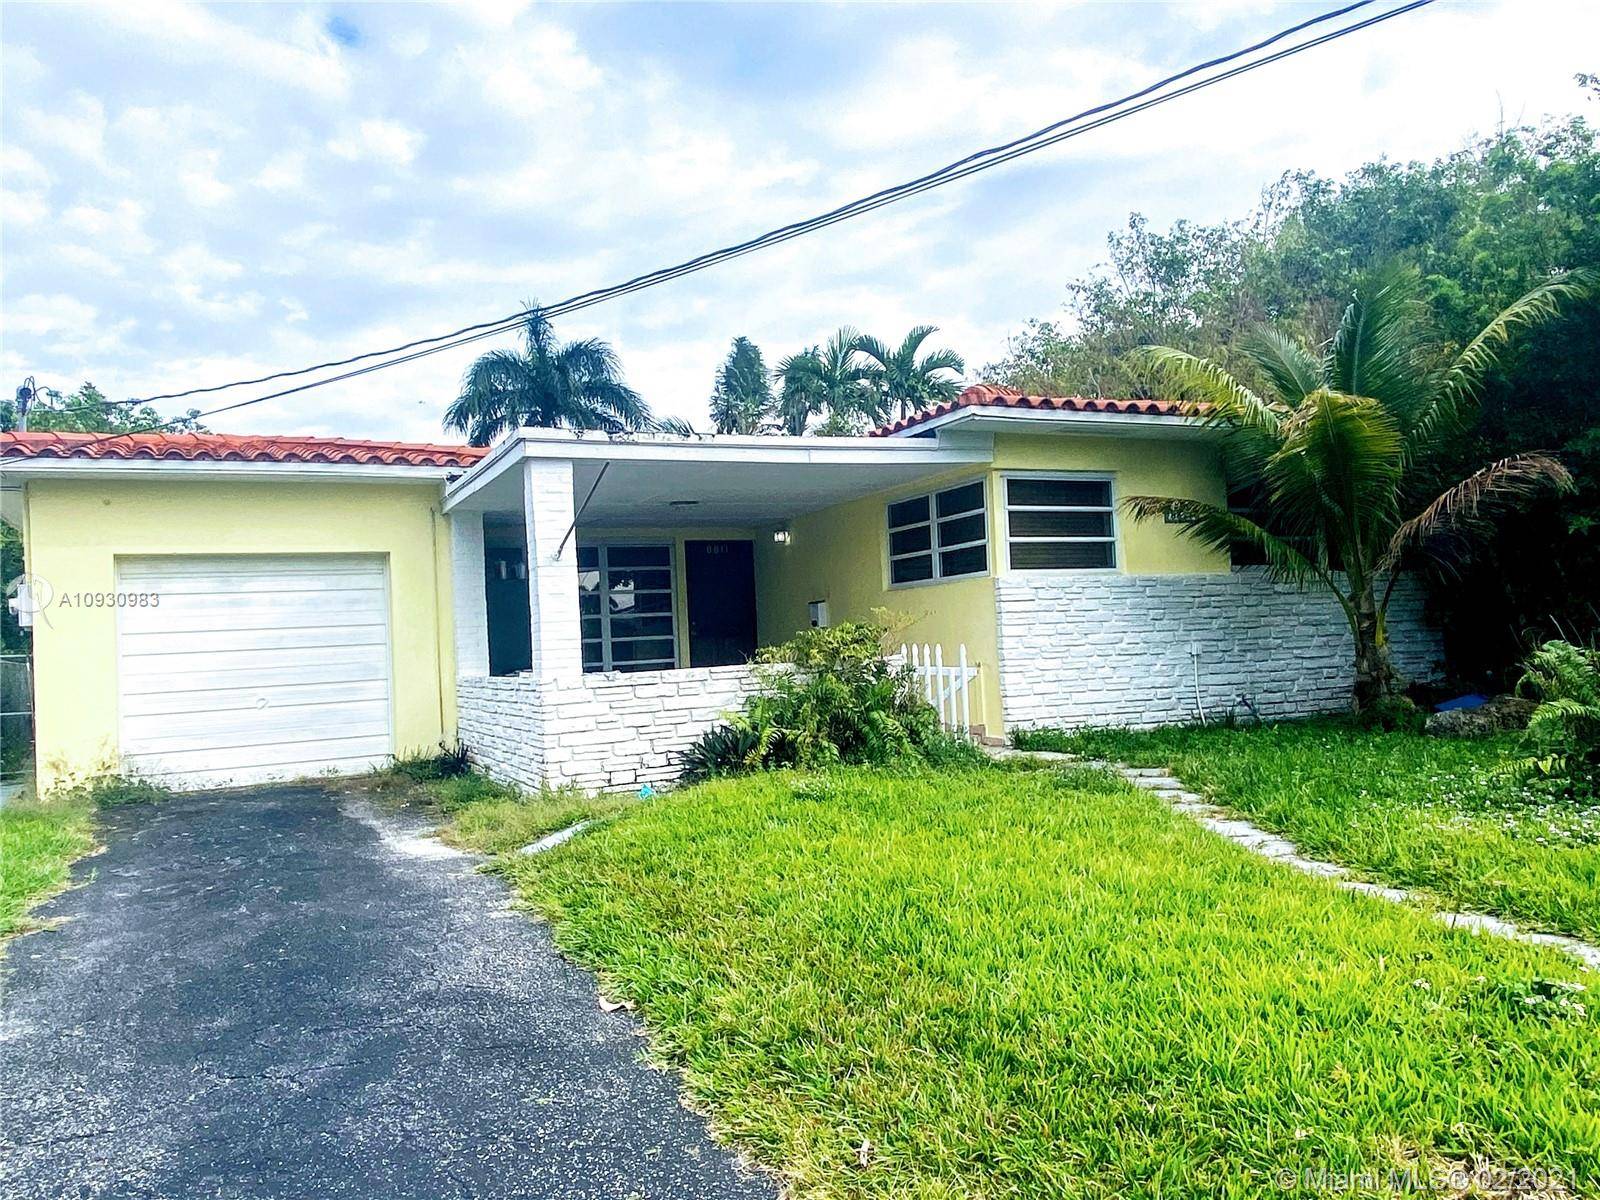 A rarity in Surfside 4 bed 3 bath very spacious and updated home.